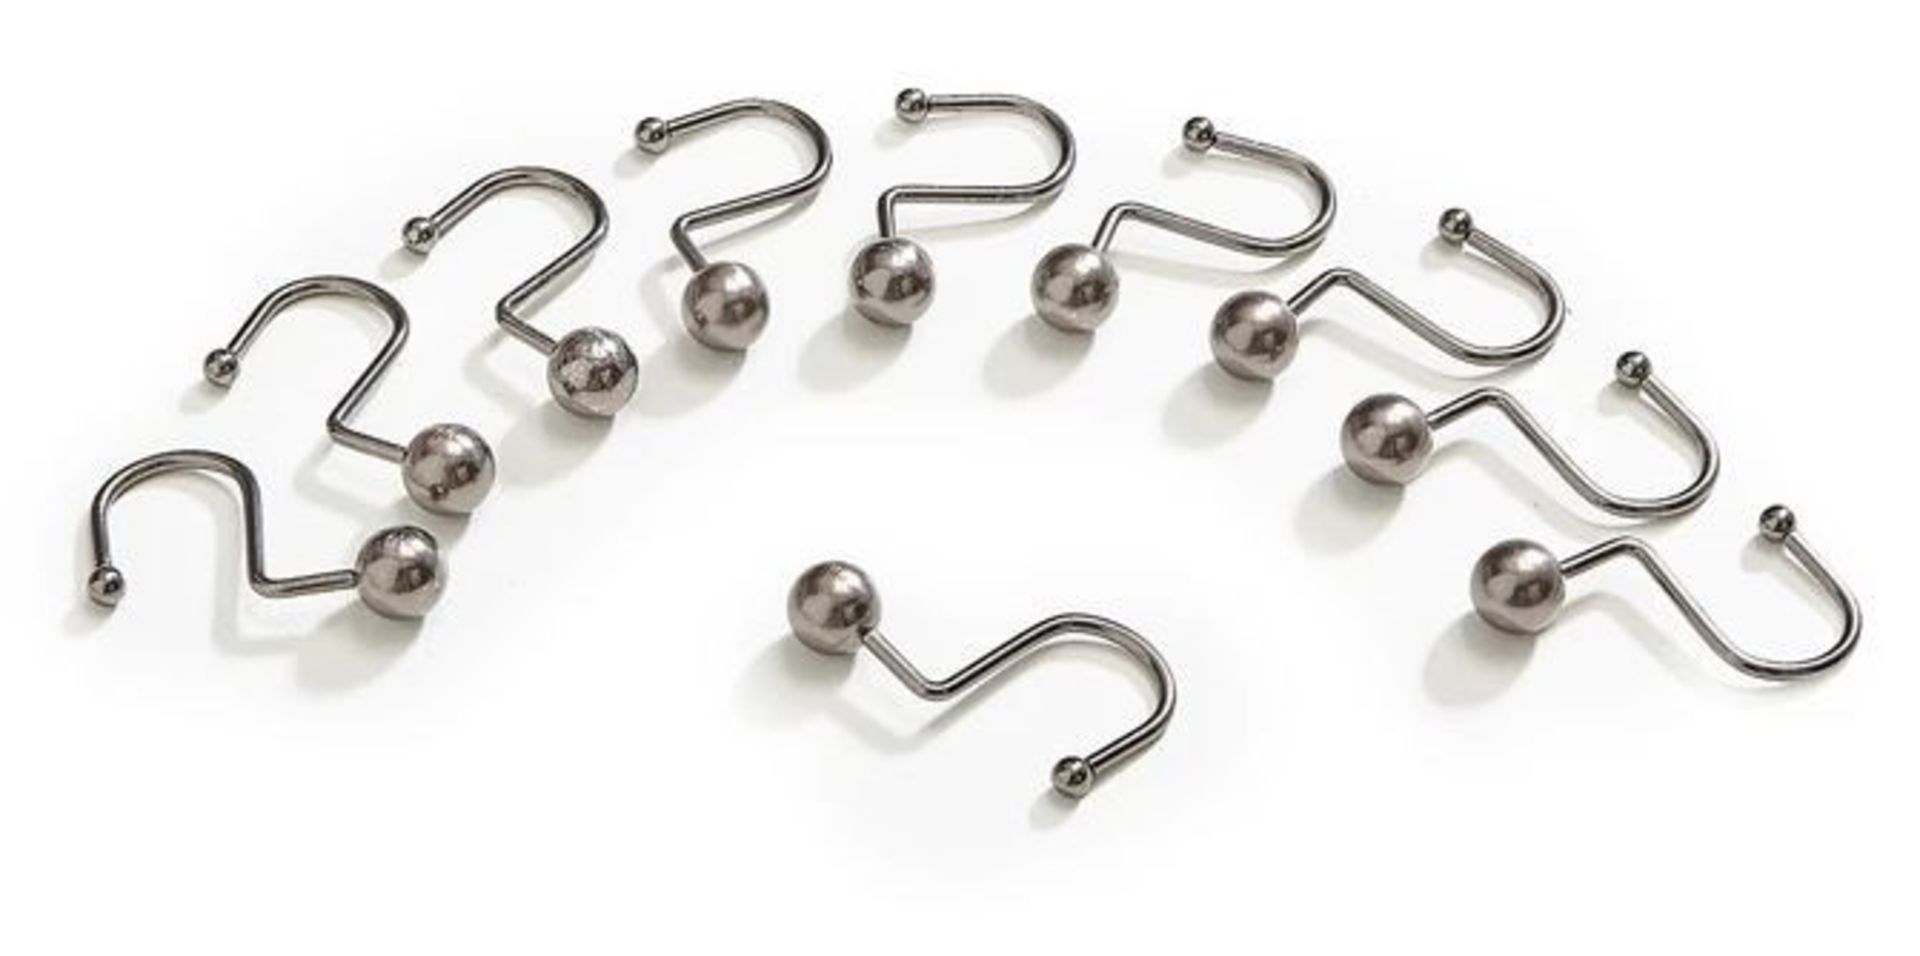 1 LOT TO CONTAIN 4 PACKS OF 10 COPALME CURTAIN HOOKS FOR LITTLE EYELETS, 40 HOOKS IN TOTAL FOR